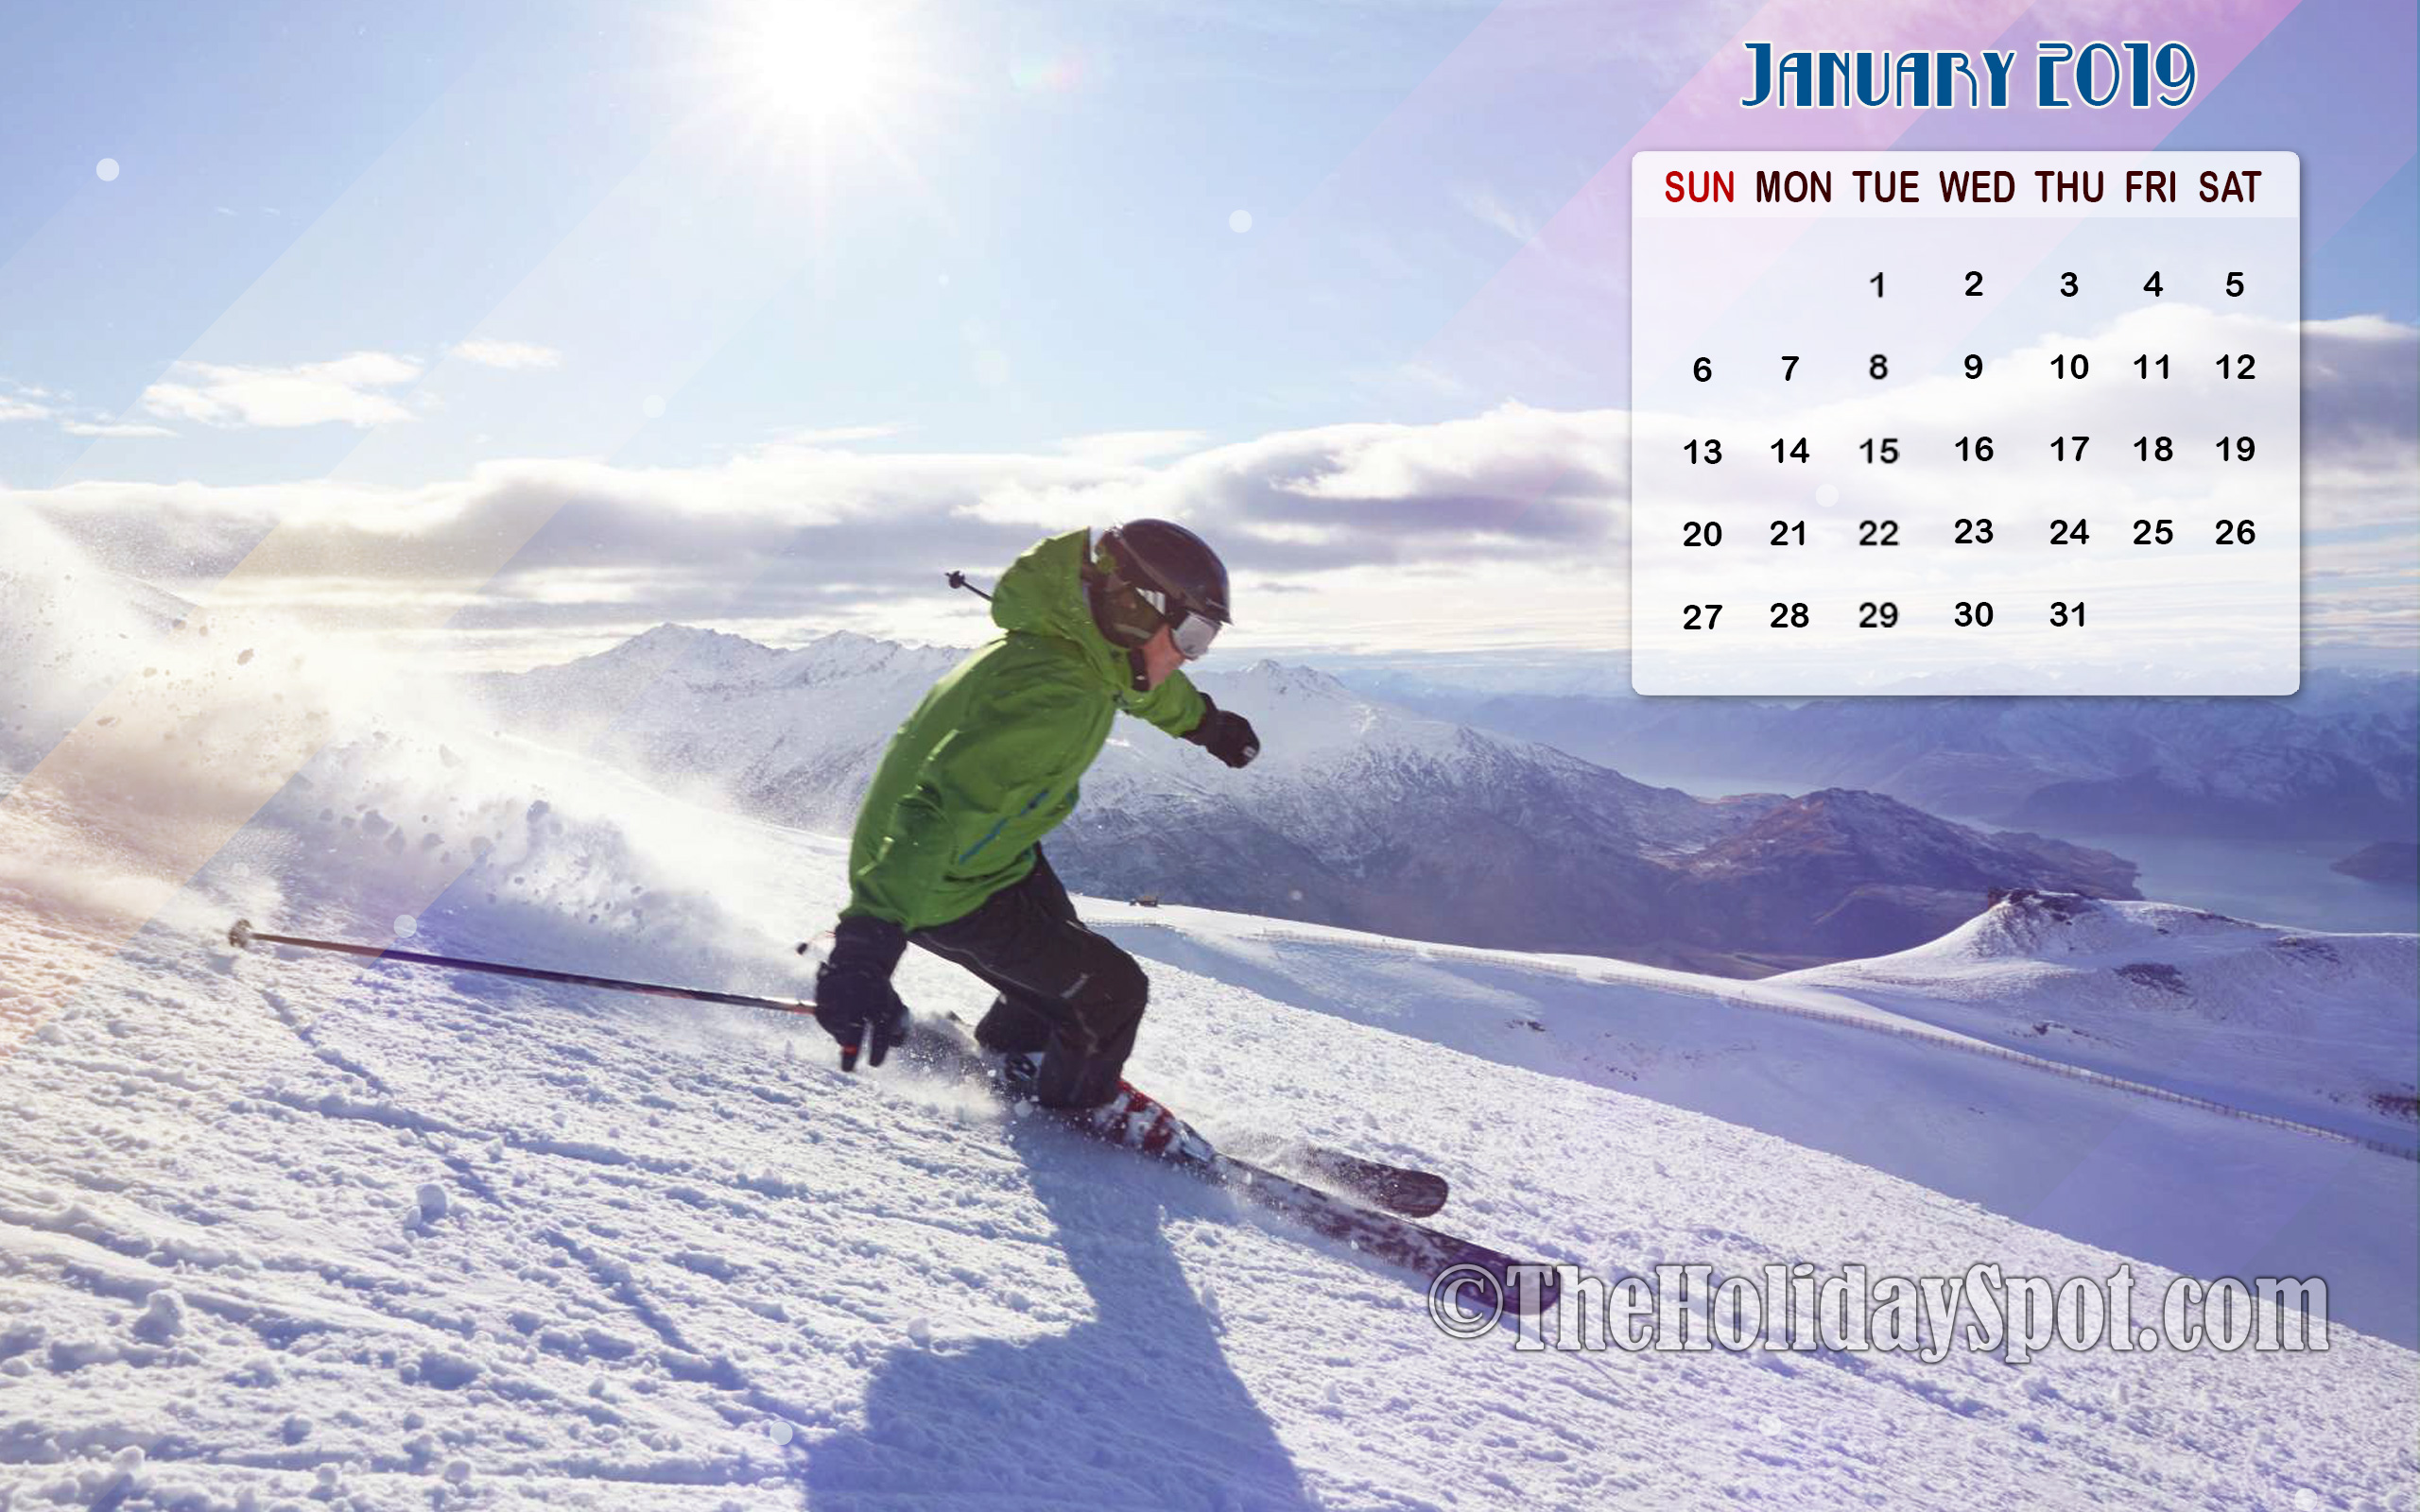 January Calendar Wallpaper 2019 Themed With Winter - Live Wallpaper Calendar 2019 , HD Wallpaper & Backgrounds